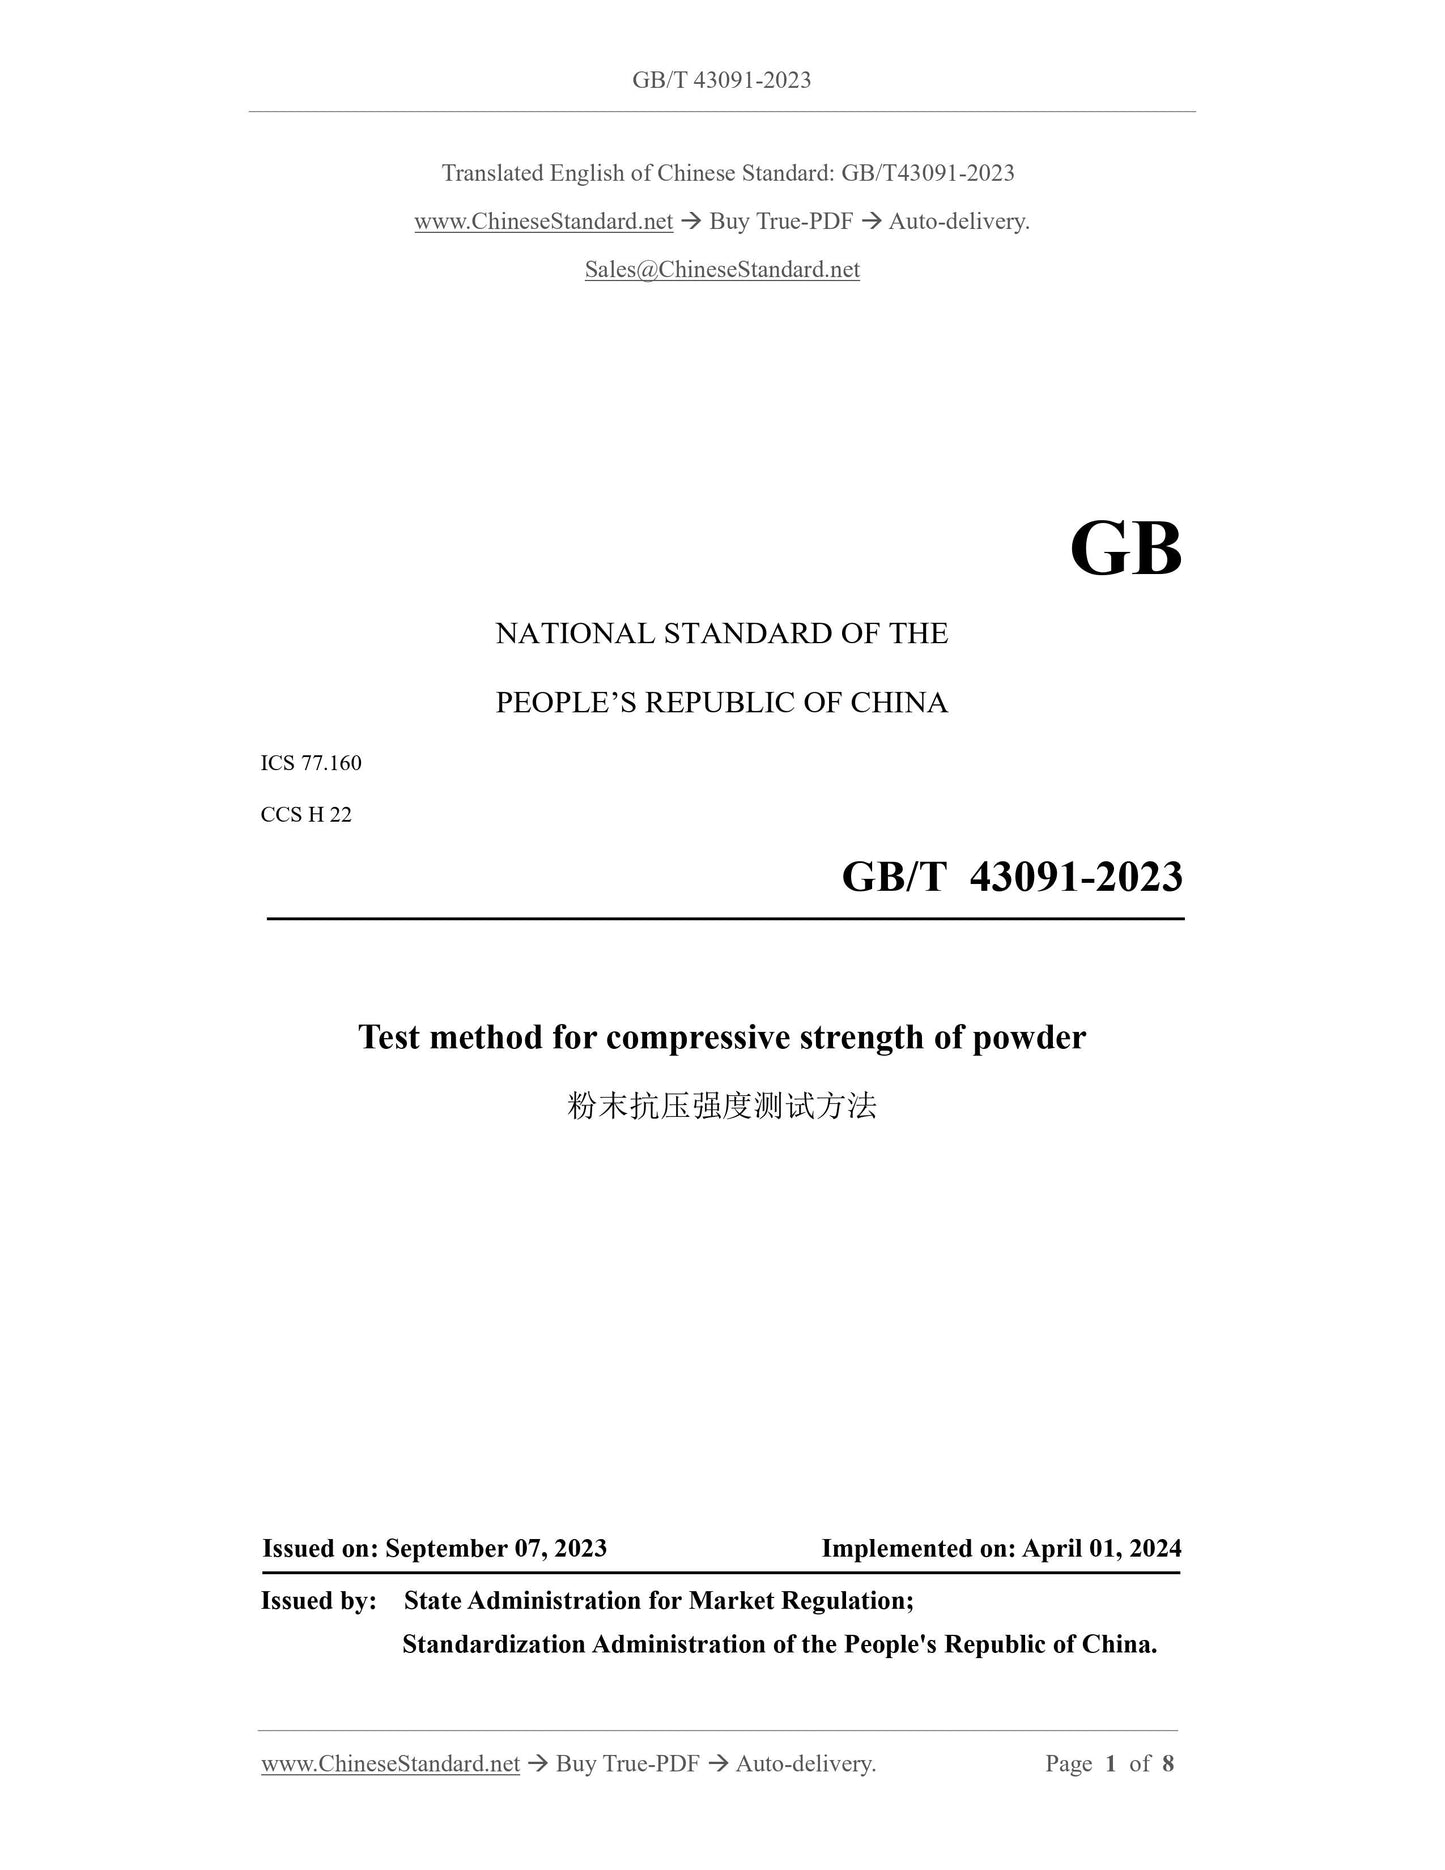 GB/T 43091-2023 Page 1